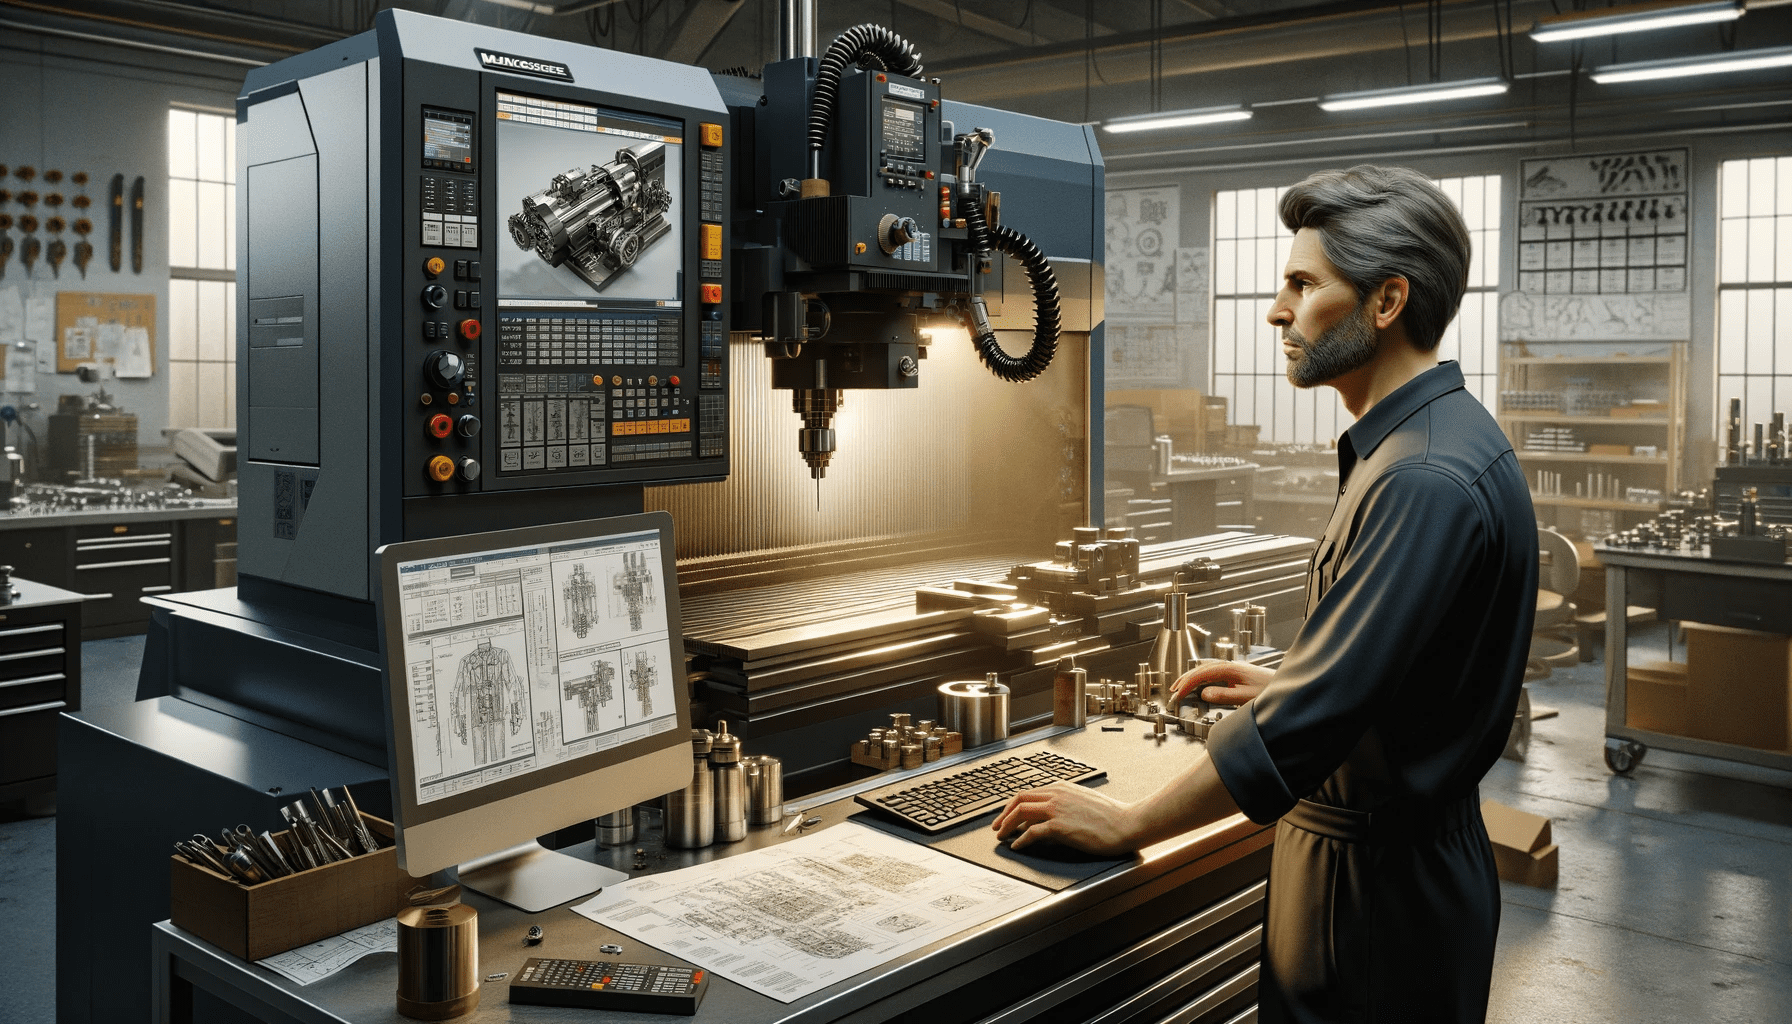 CNC machinist working in a CNC workshop environment. The machinist, a middle-aged Caucasian man, is intently operating a large,